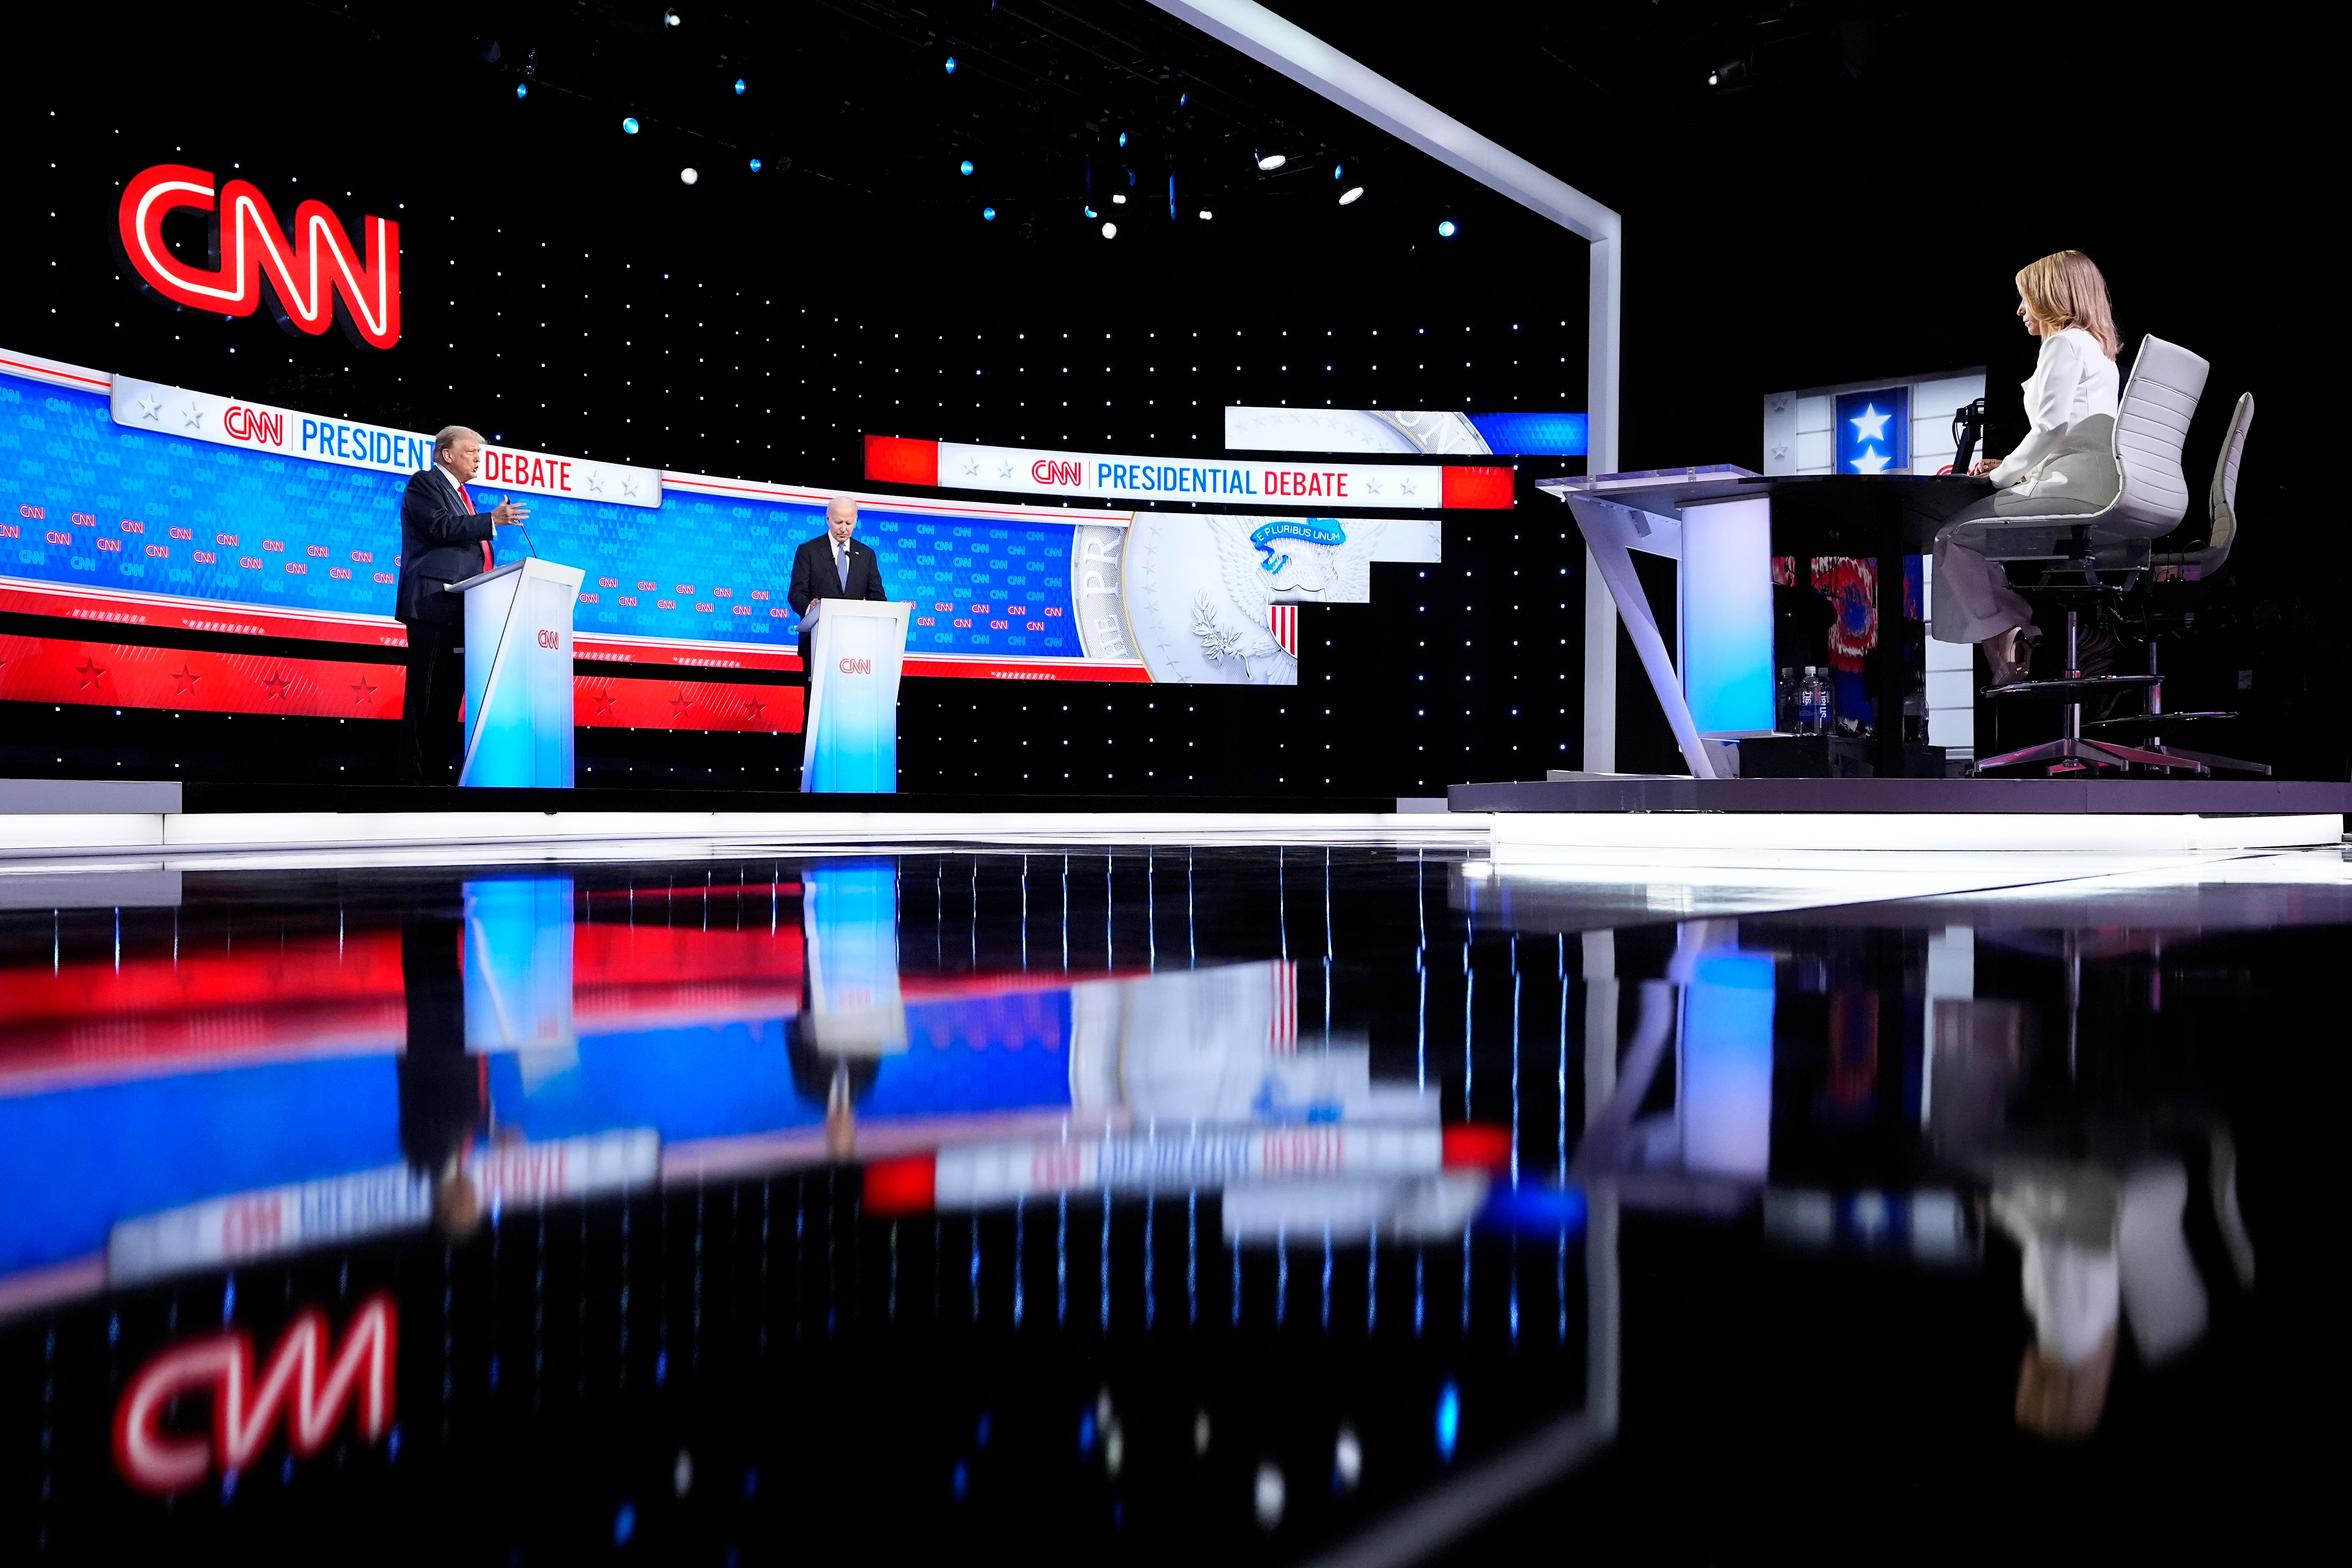 CNN came out as the real ‘loser’ some viewers stated after Donald Trump and Joe Biden went head-to-head in the first 2024 general election debate. Viewers lamented the lack of fact-checking and questioning of the candidates